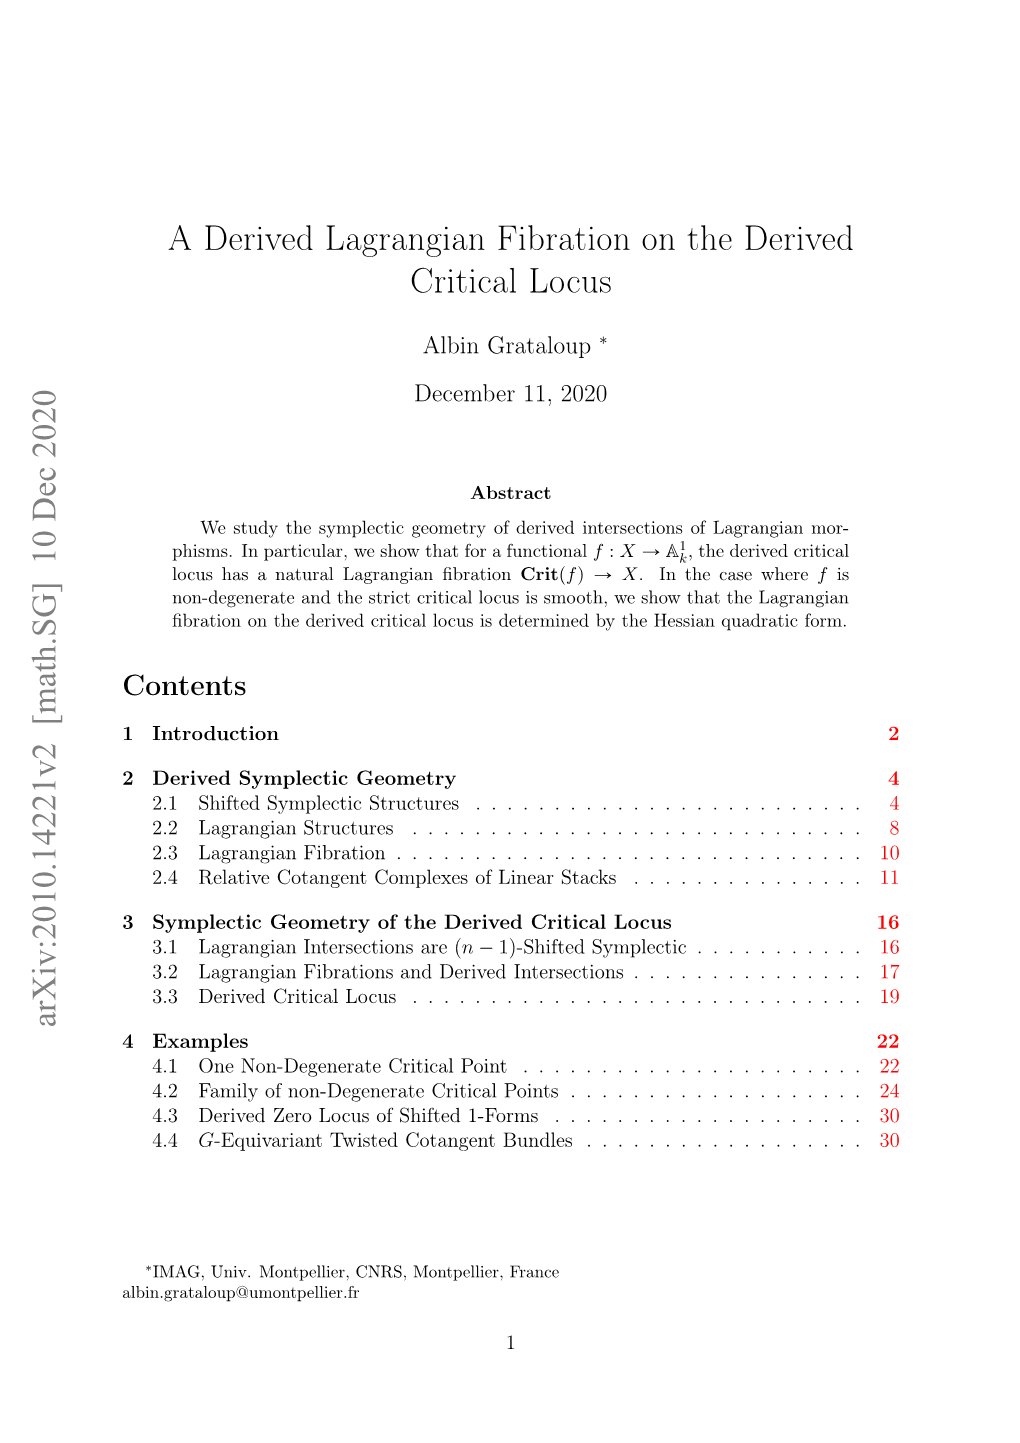 A Derived Lagrangian Fibration on the Derived Critical Locus